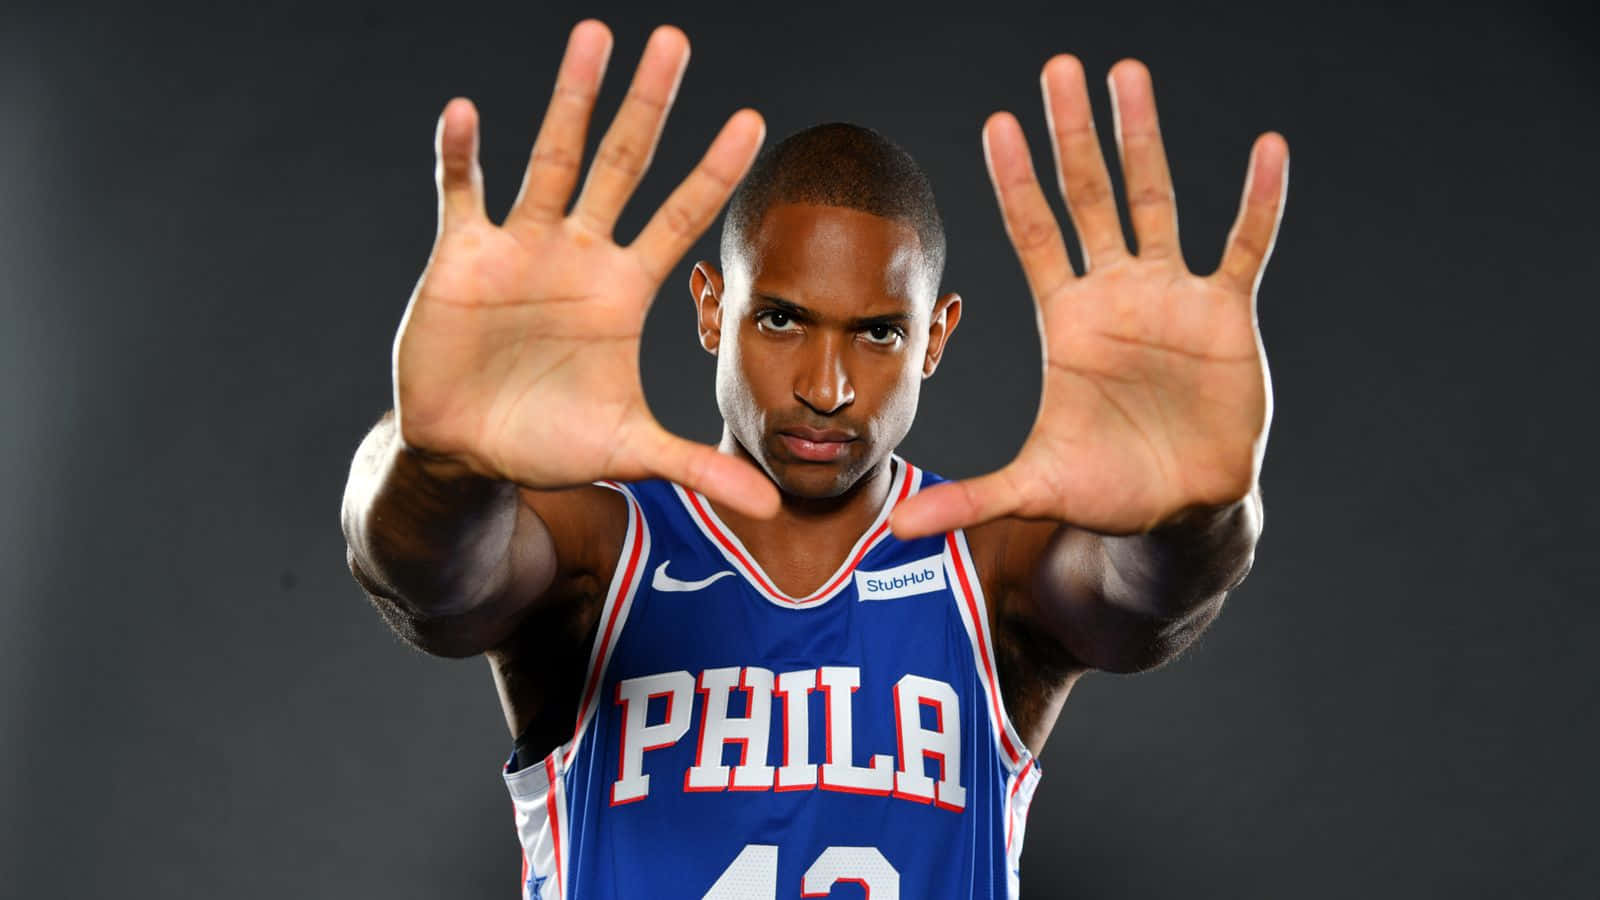 Al Horford stands tall in the NBA, shattering expectations and pushing the boundaries of what a professional basketball player can be.